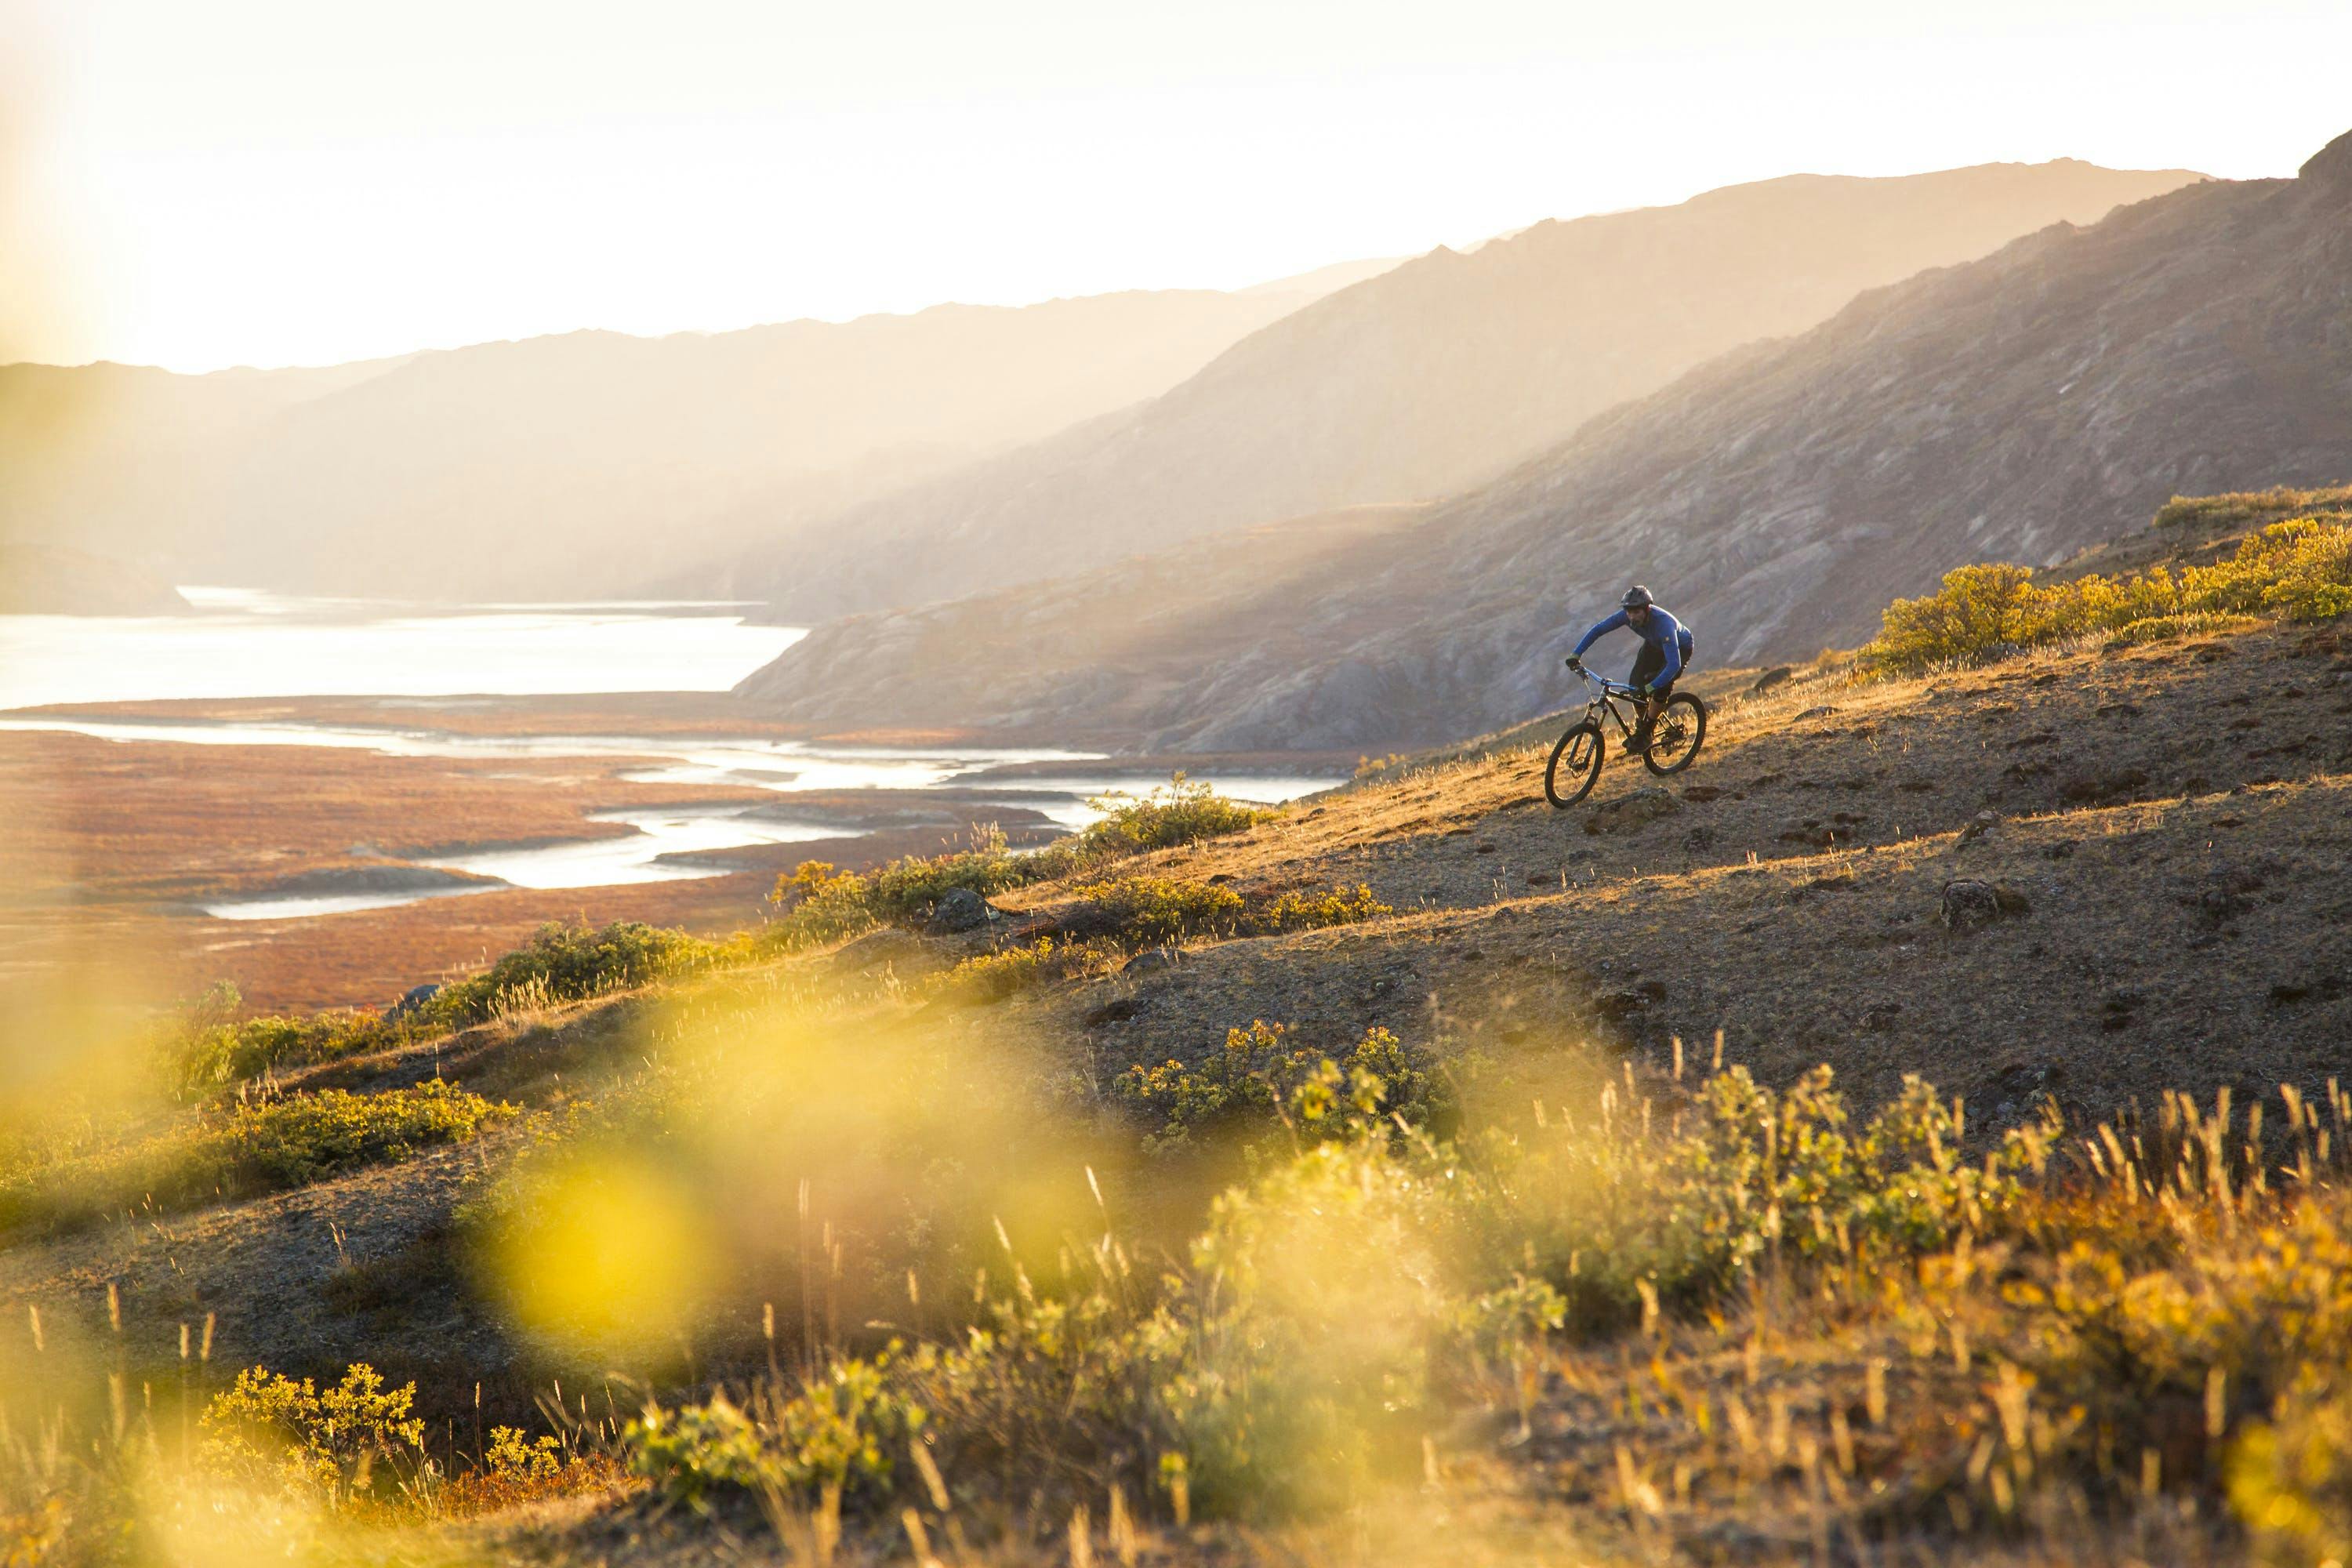 A lone cyclist rides across a grassy slope at golden hour with mountains behind him.